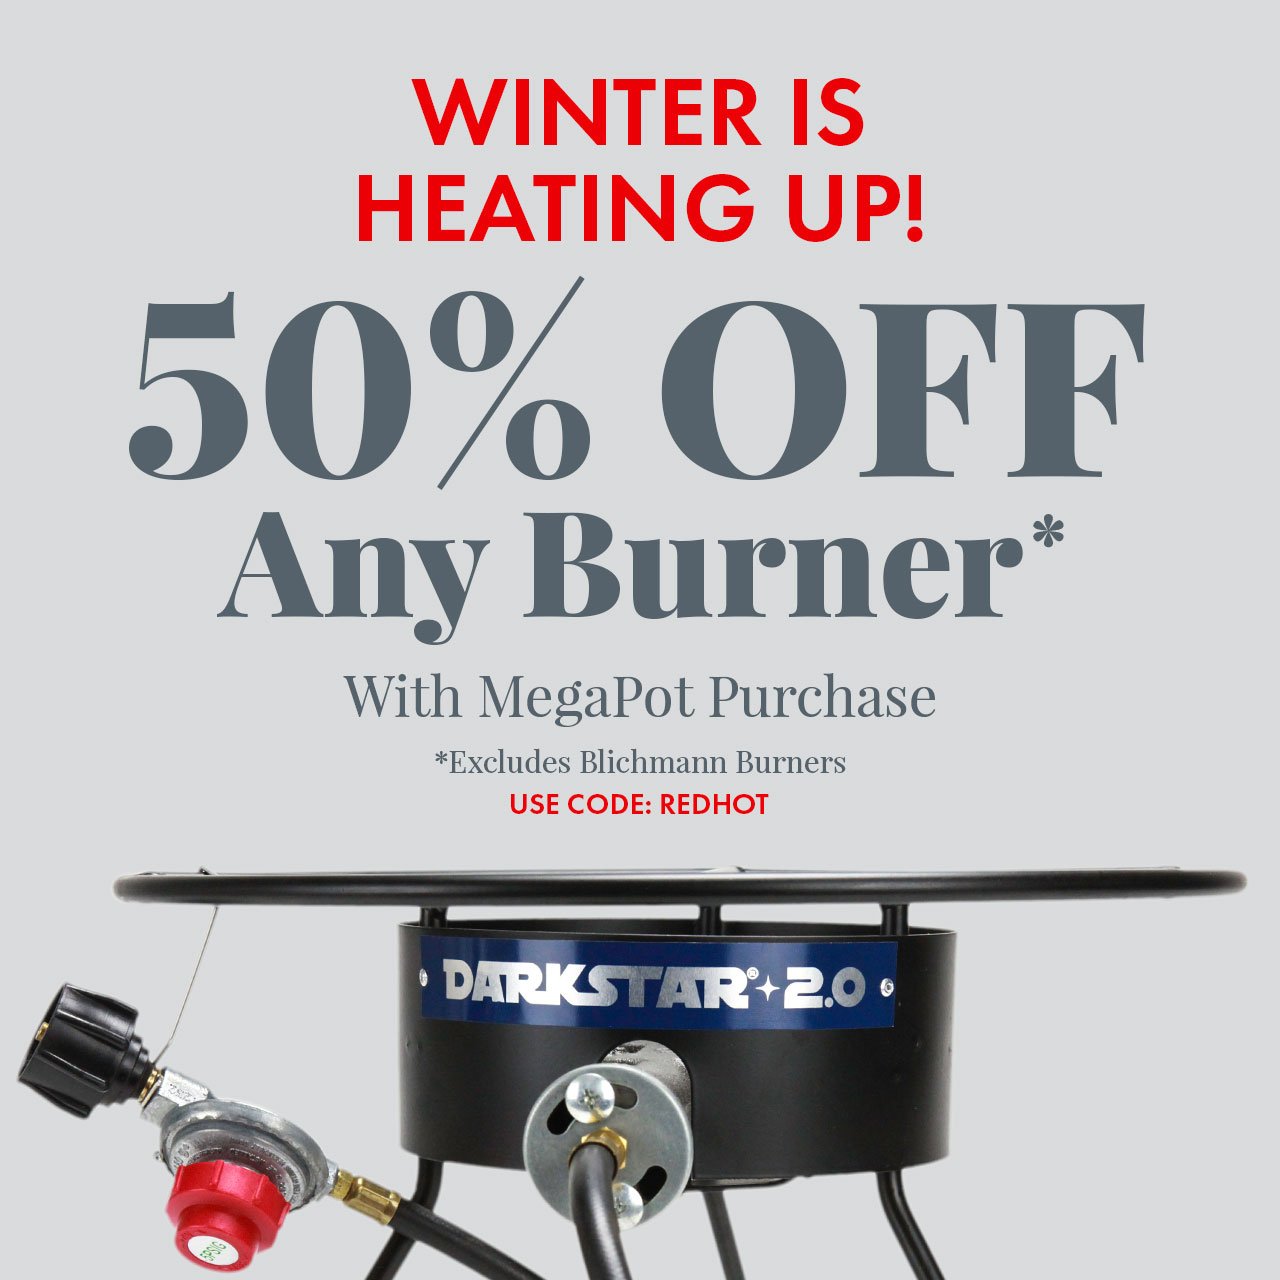 50% Off Any Burner with MegaPot Purchase